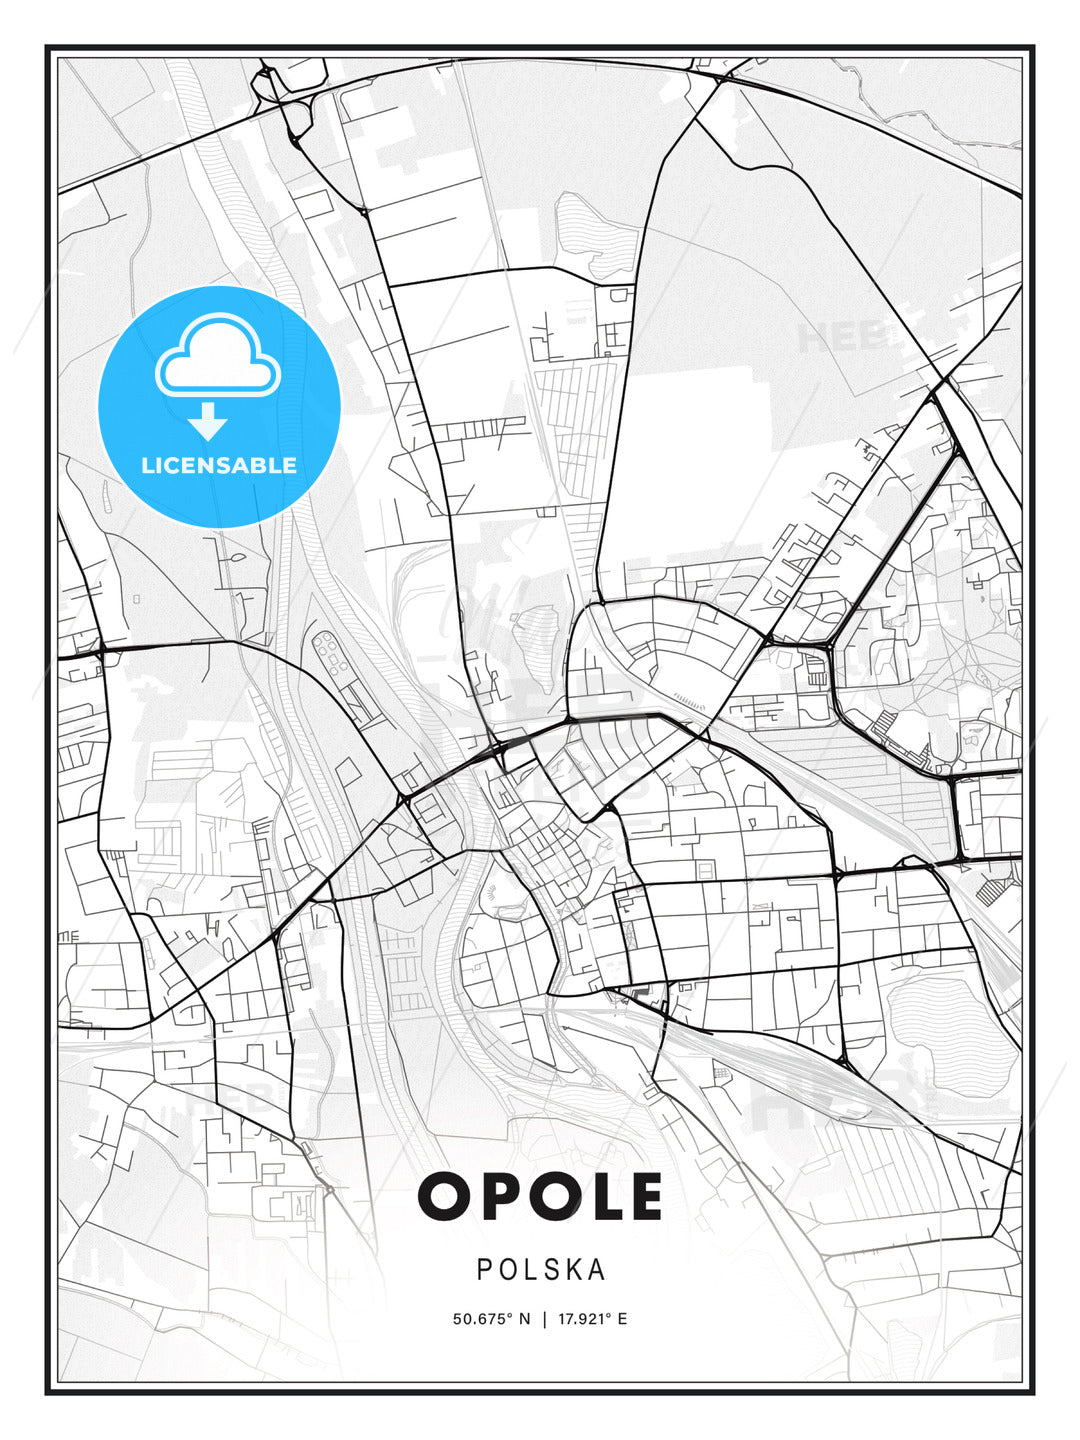 Opole, Poland, Modern Print Template in Various Formats - HEBSTREITS Sketches